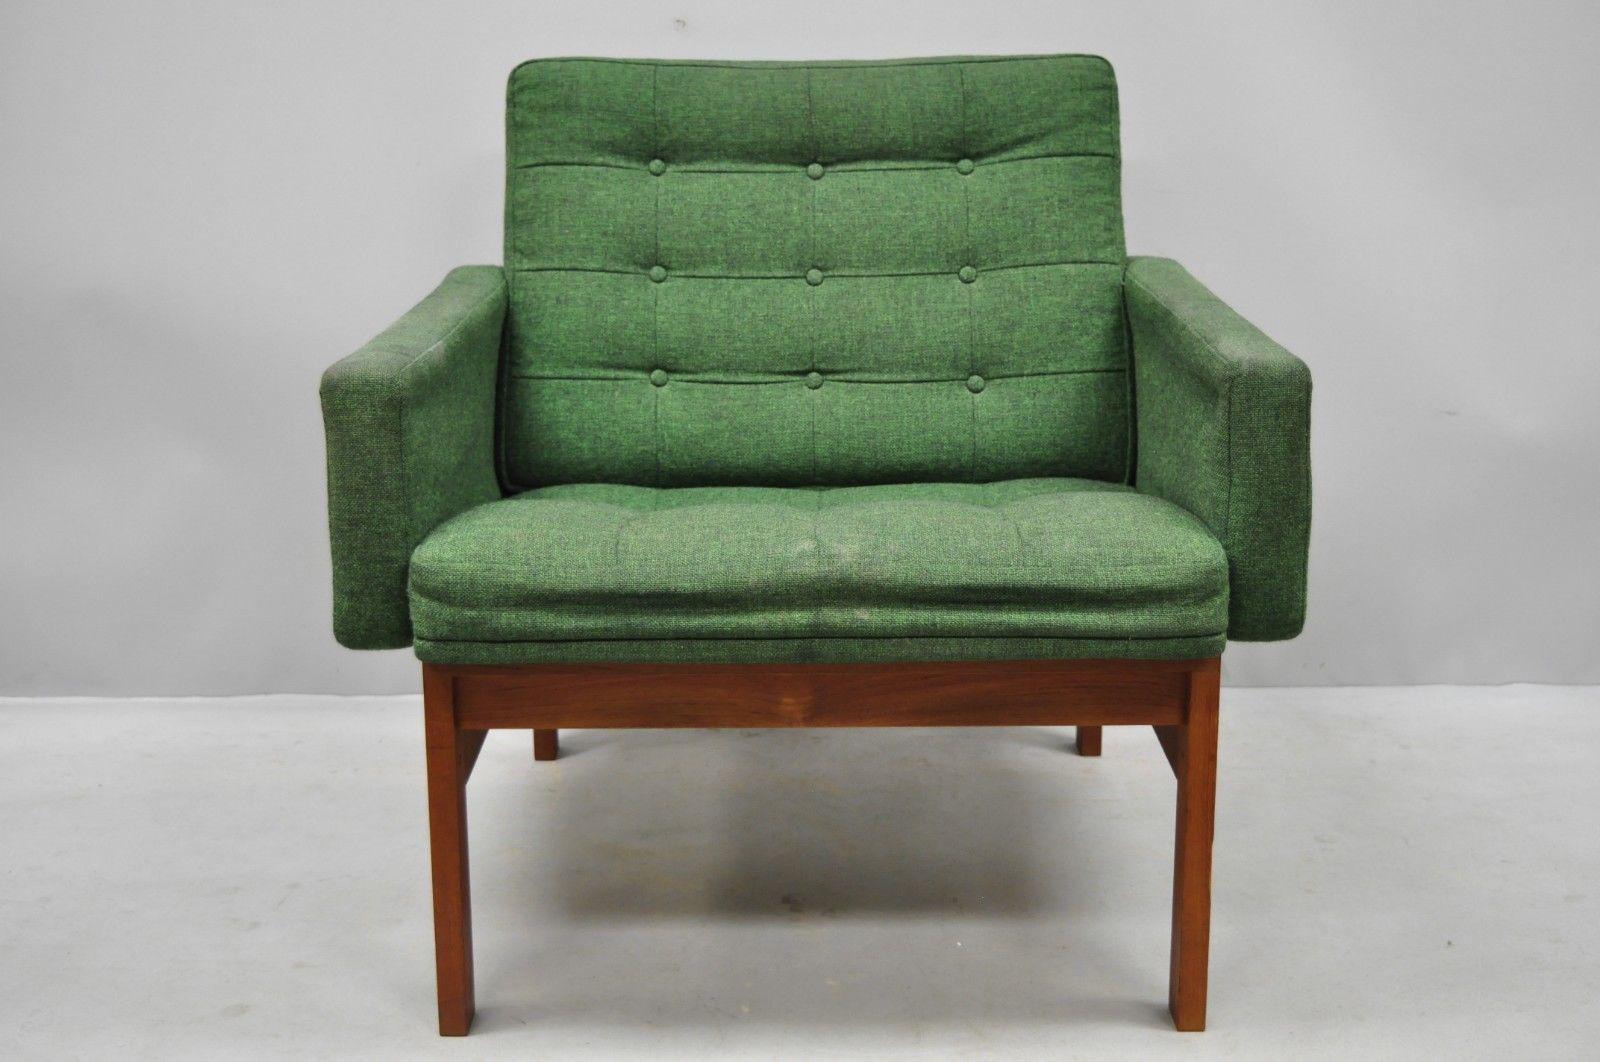 Ole Gjerlov-Knudsen and Torben Lind moduline France & Son lounge armchair. Item features exposed joinery, original green tufted upholstery, solid wood construction, beautiful wood grain, original label, clean modernist lines, circa 1960.